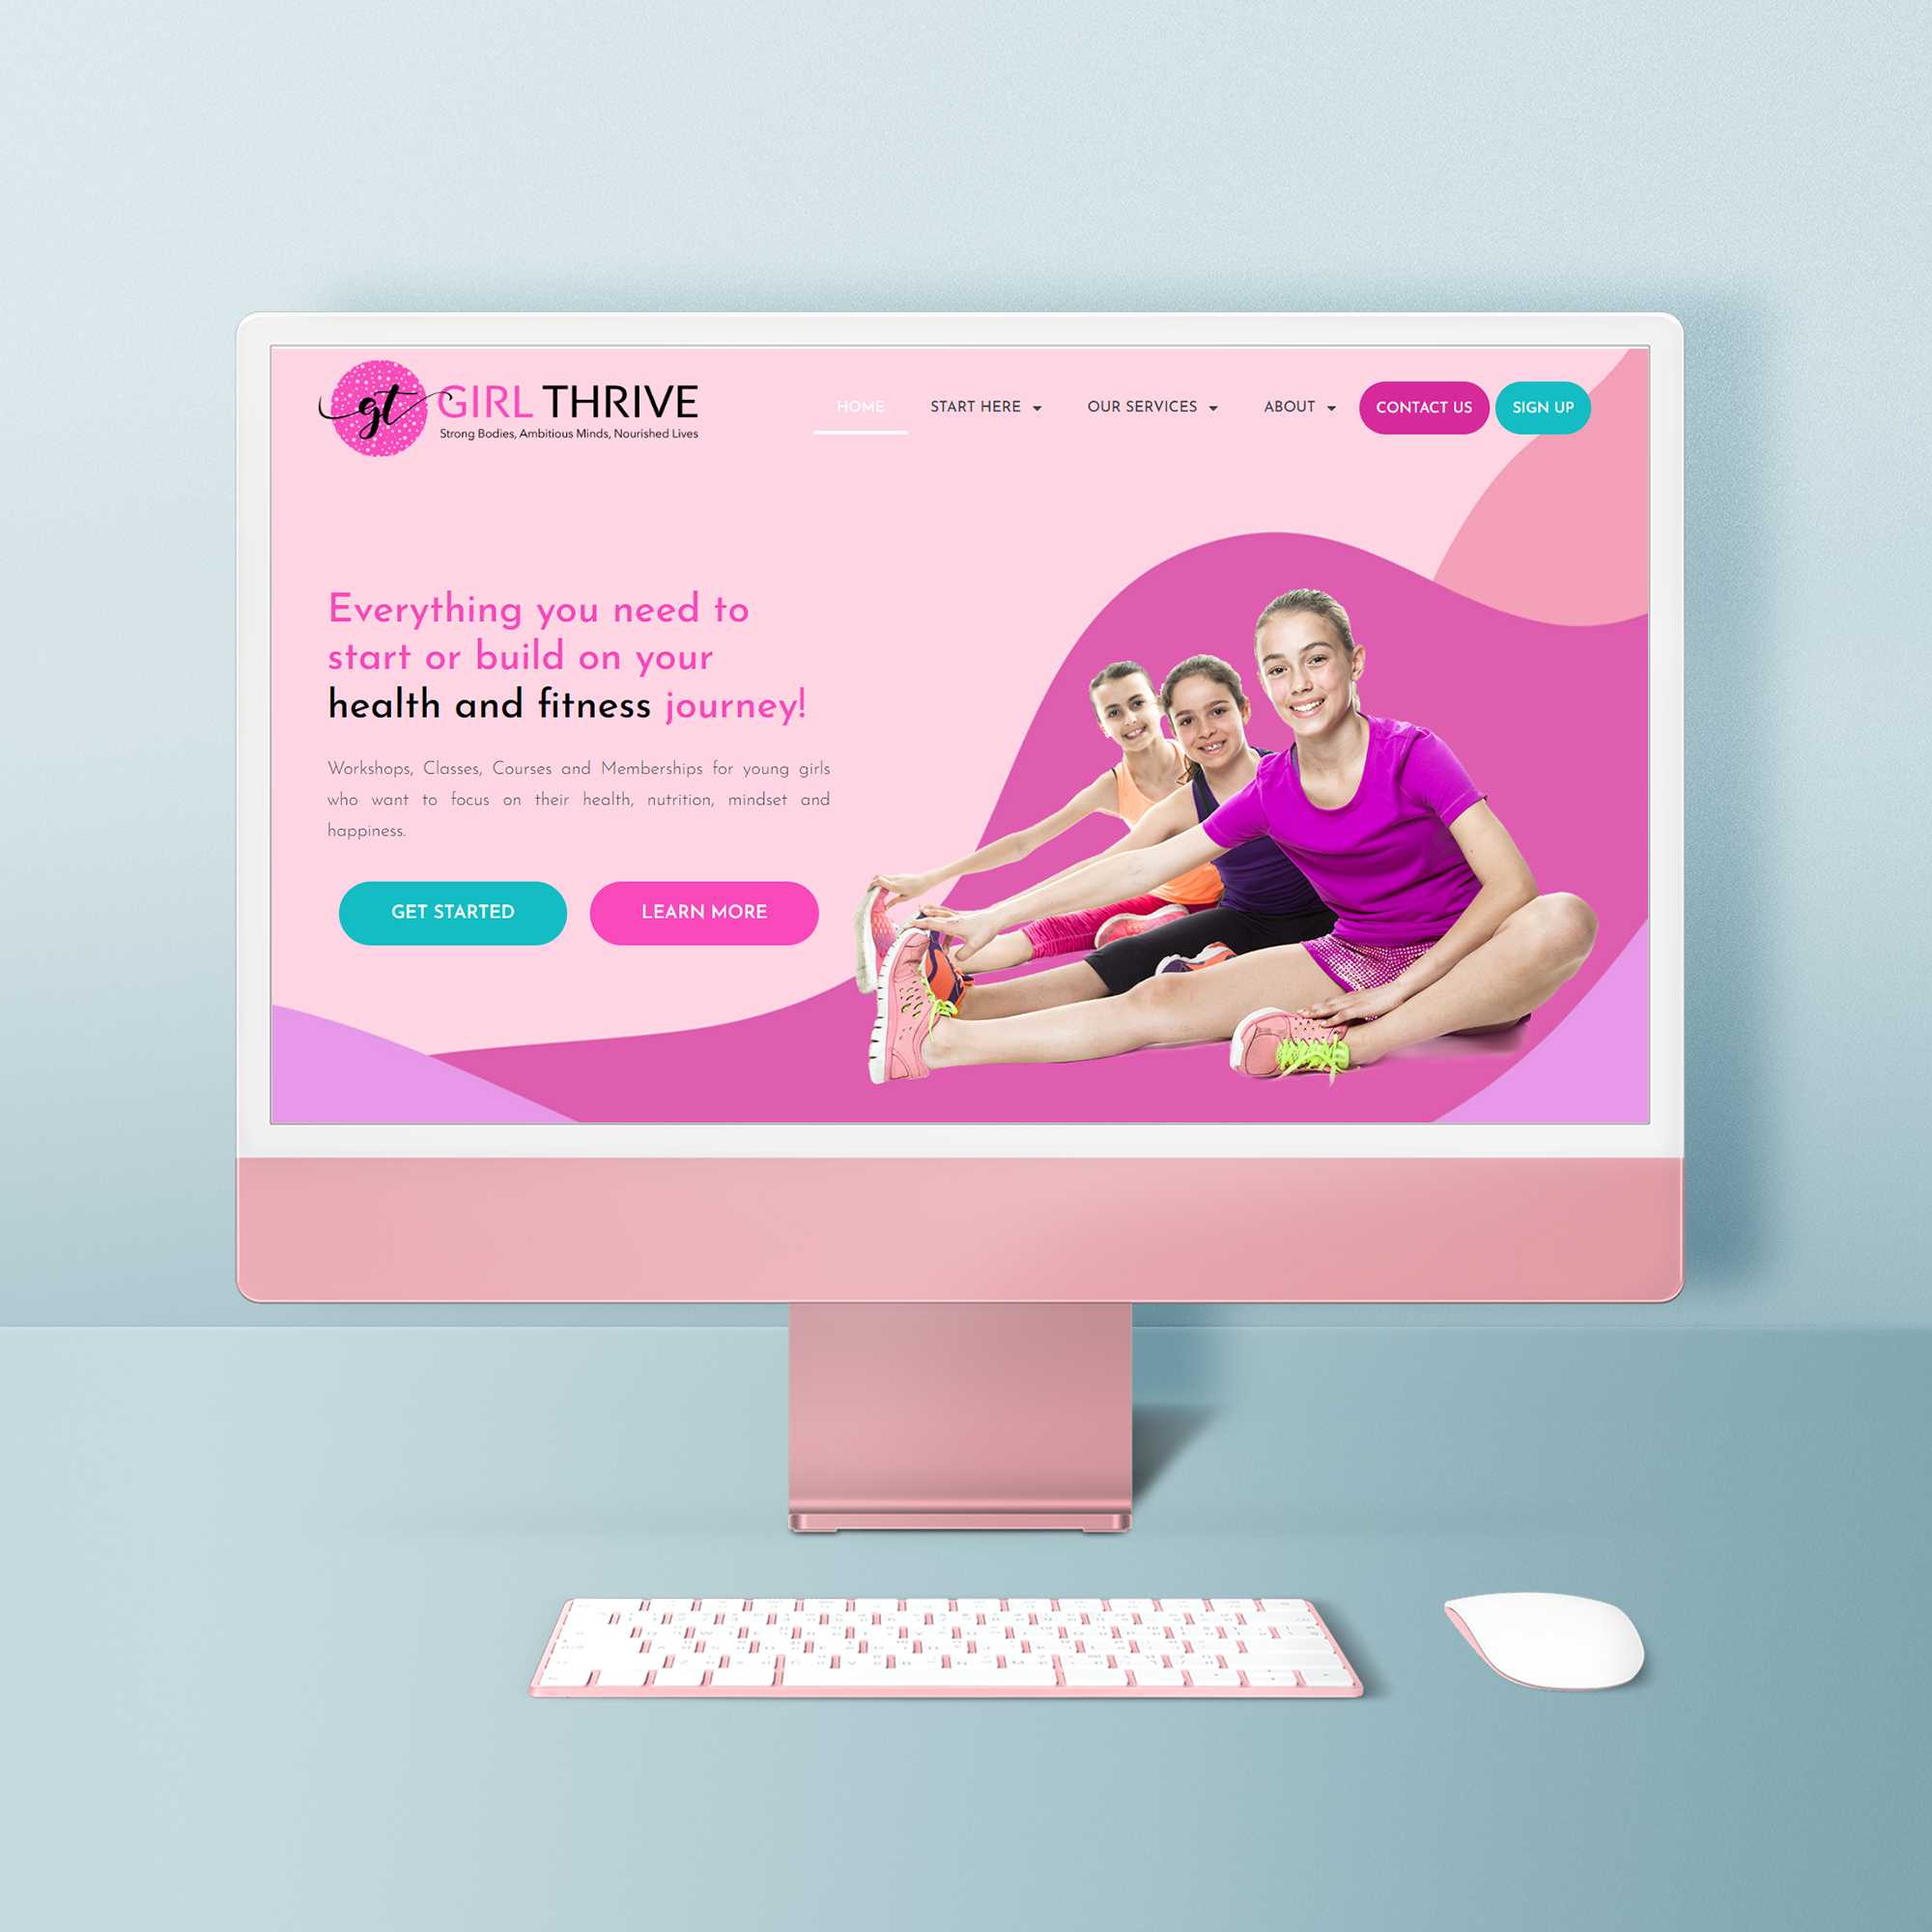 Girl Thrive Website design by Think Goat